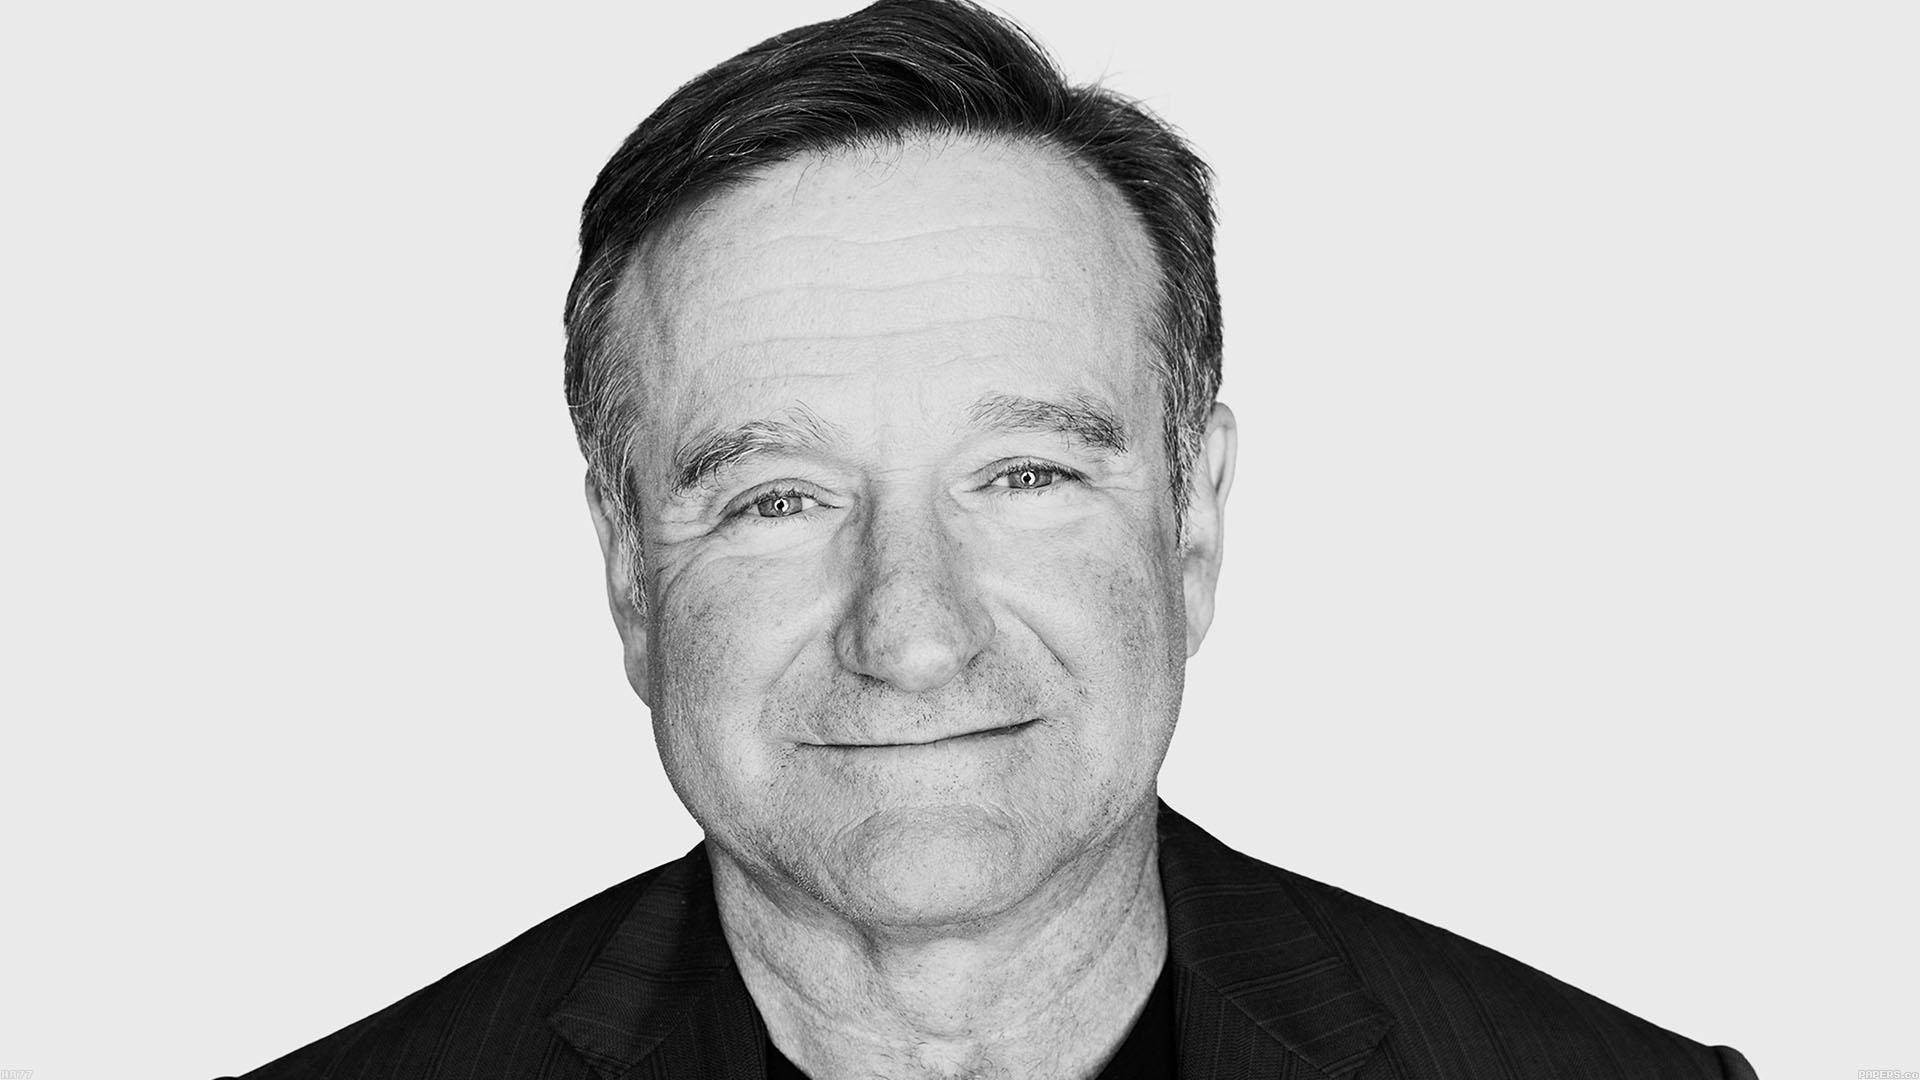 Robin Williams Wallpapers - Wallpaper Cave